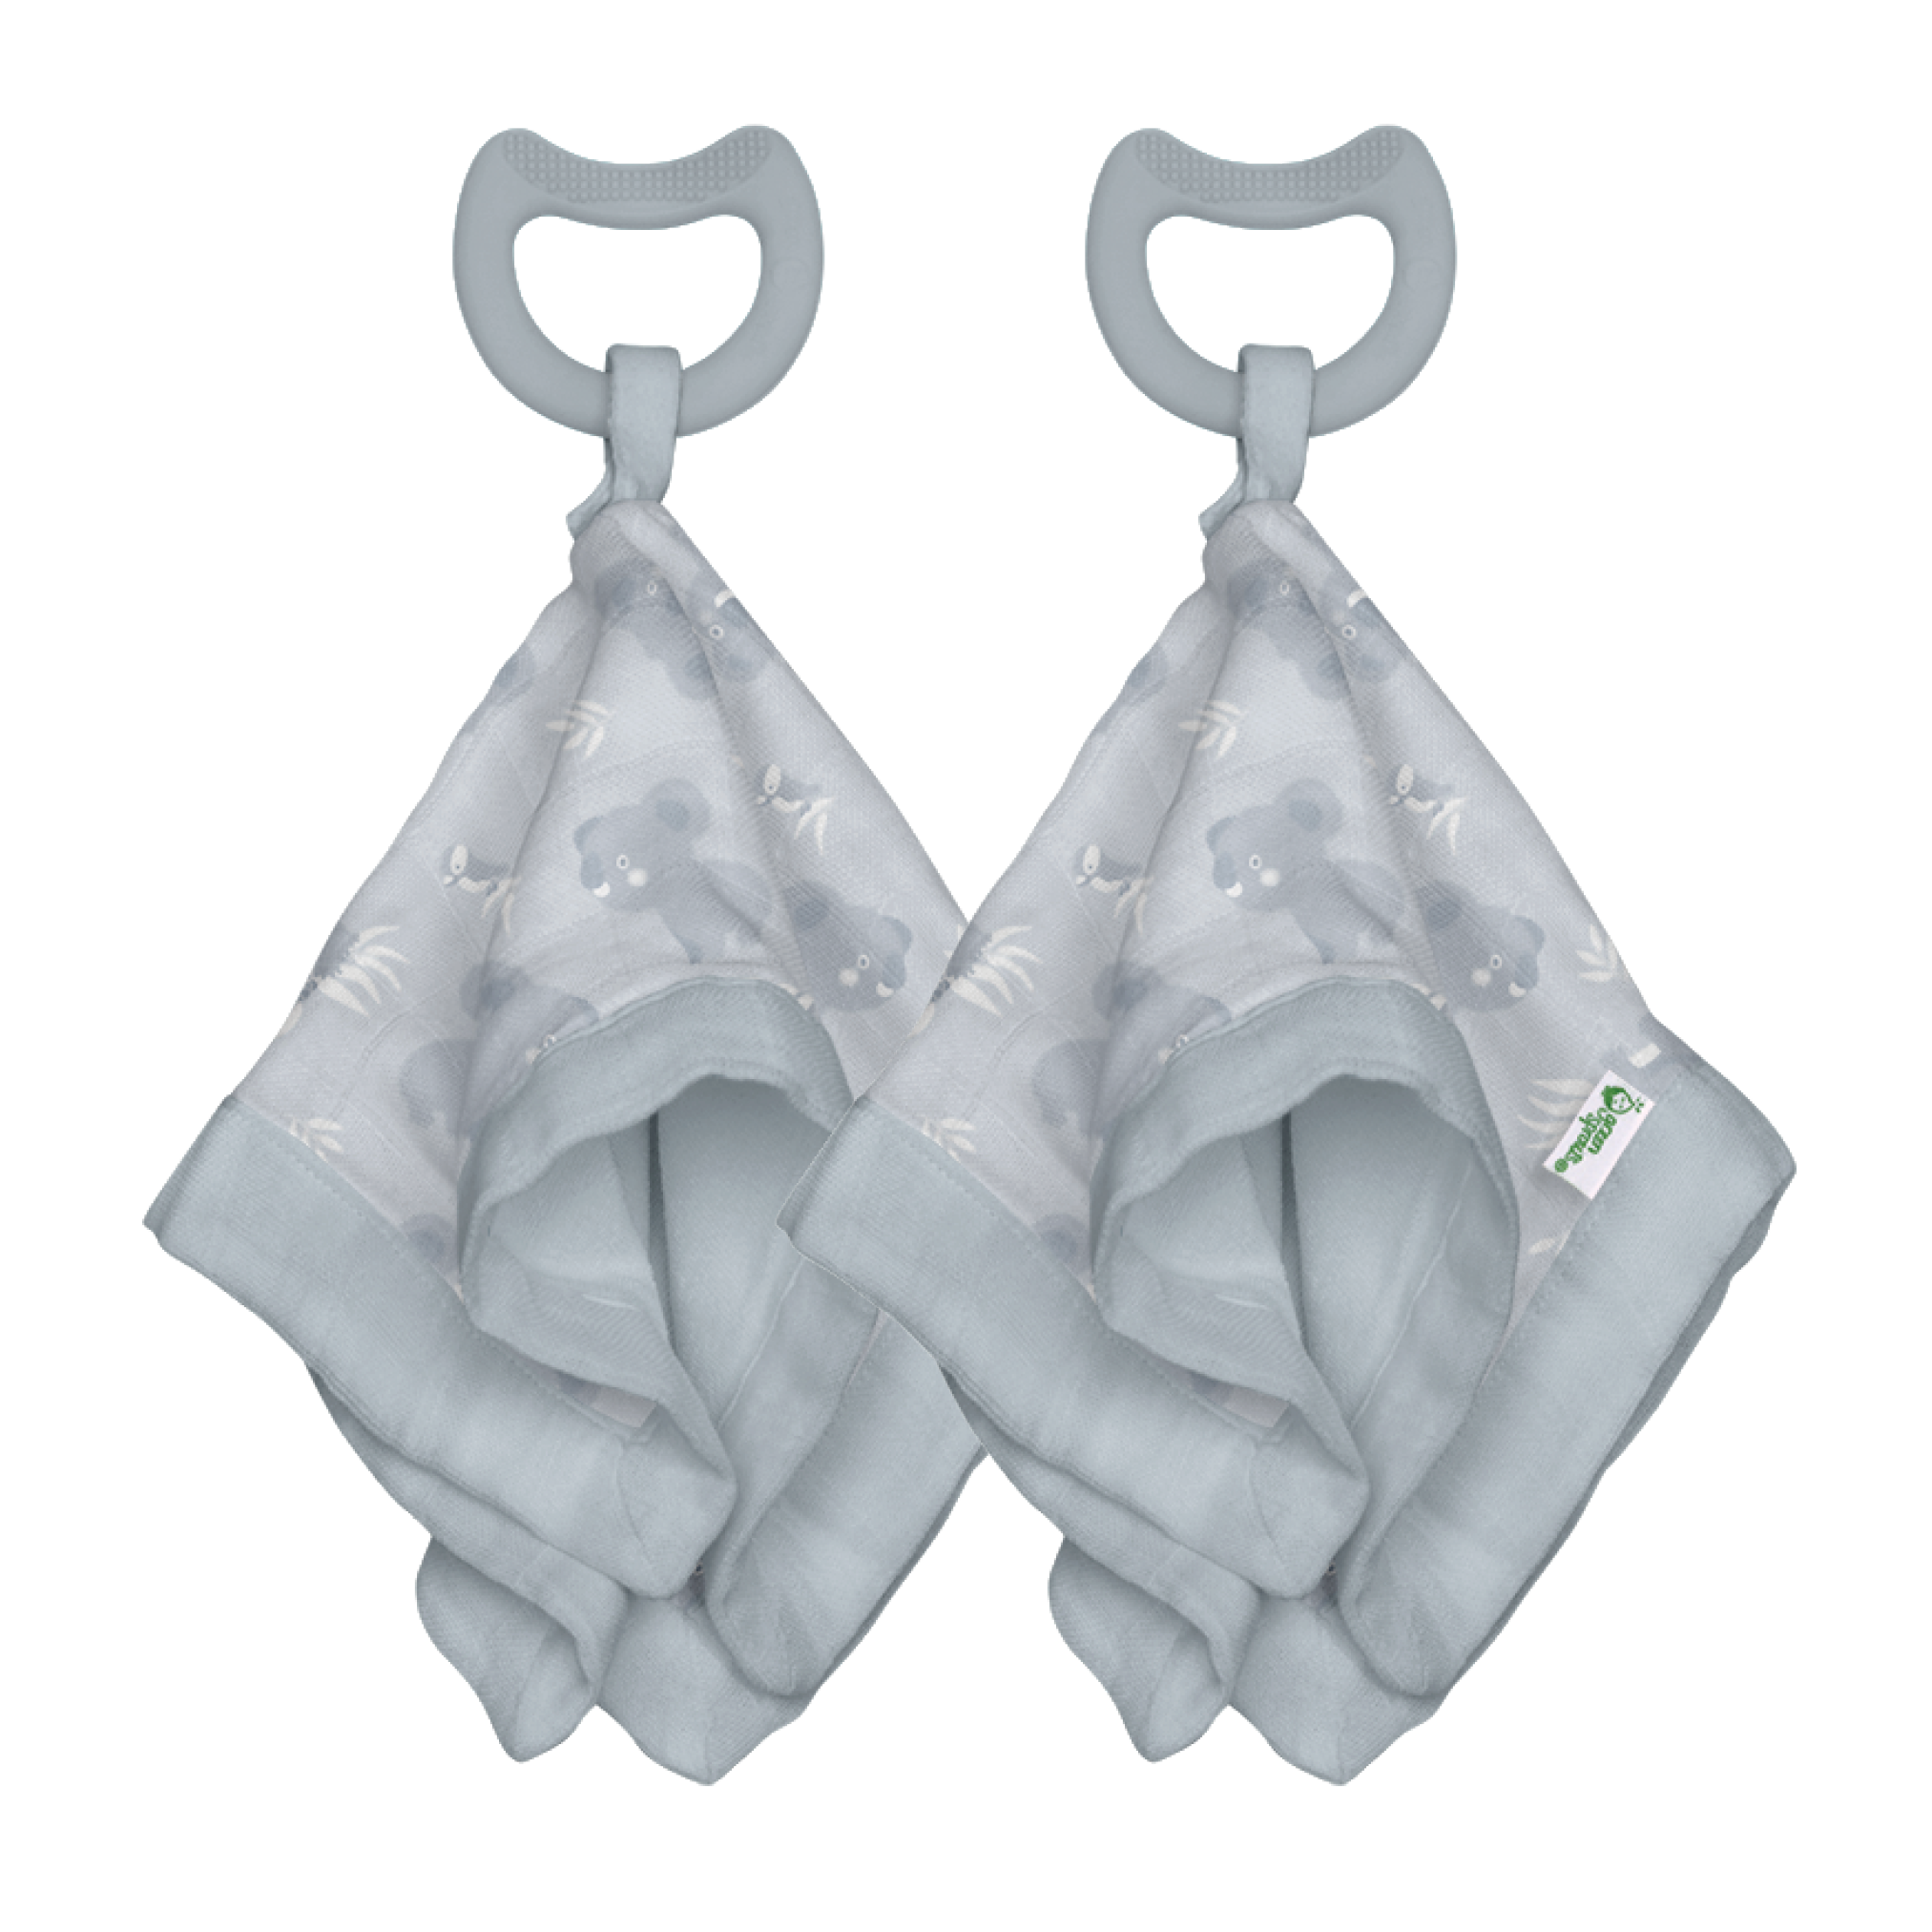 Muslin Snuggle Blankie Teether made from Organic Cotton (2 pack)